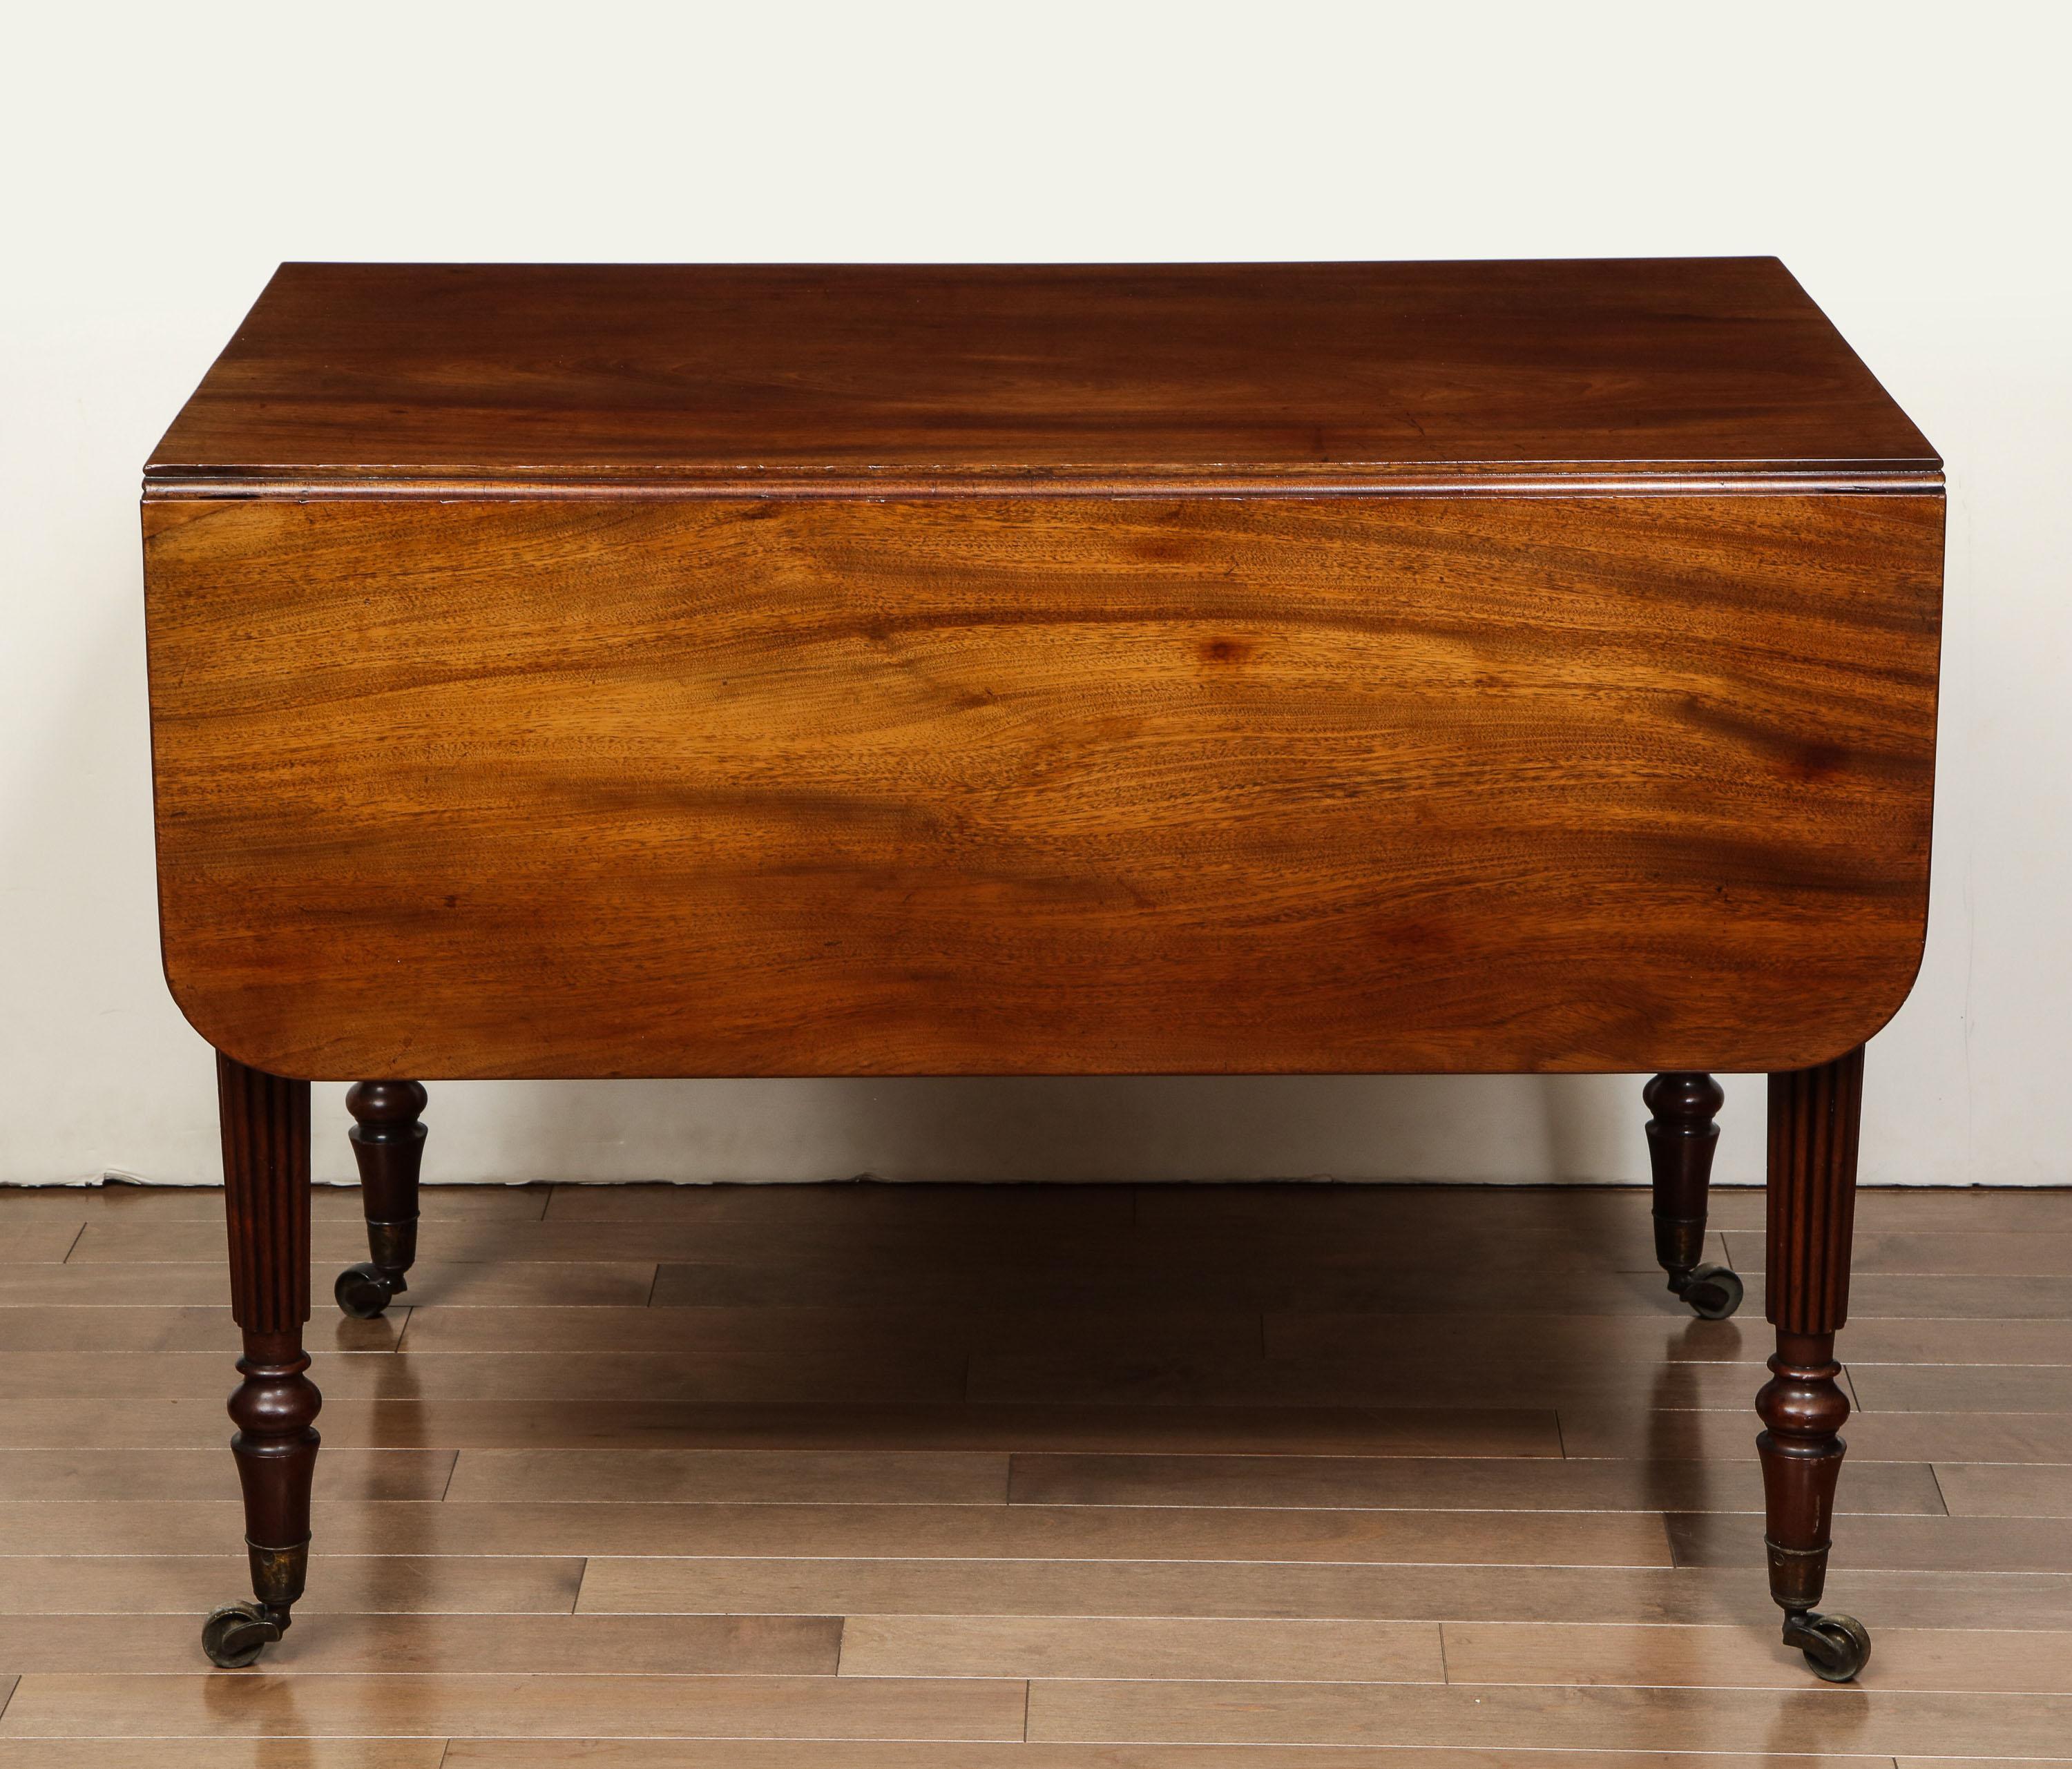 English Pembroke table with one drawer in mahogany, circa 1830.